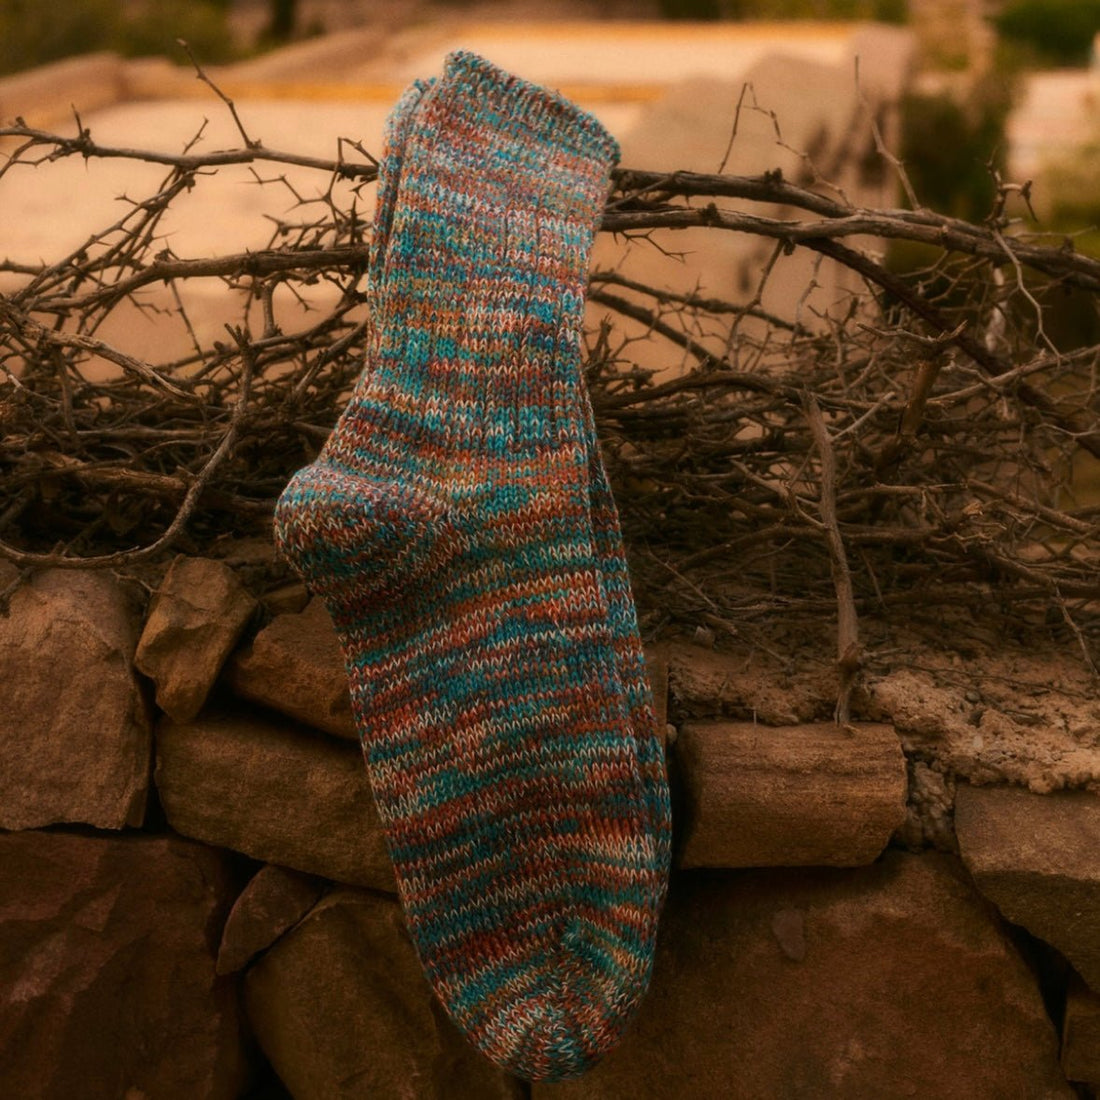 Thunders Love Socks - Forest Collection, Blue River - The Flower Crate